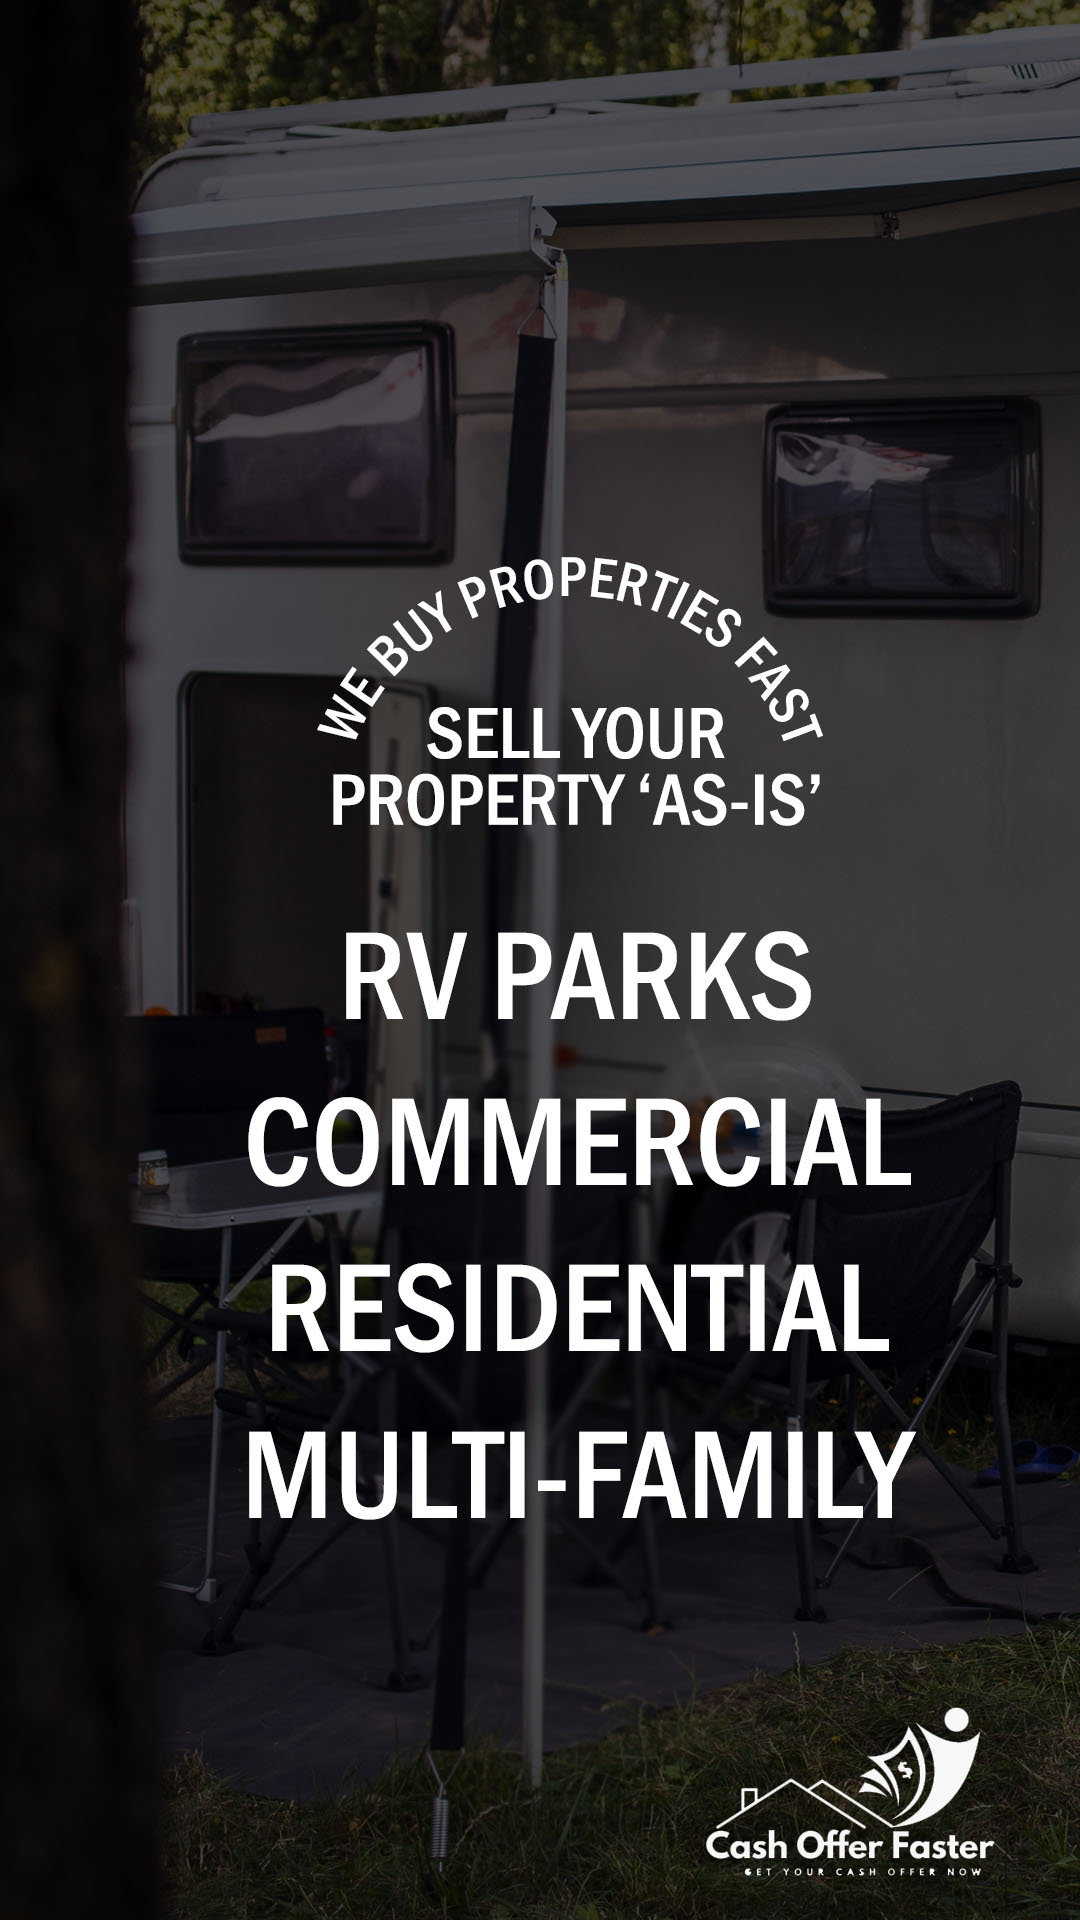 We Buy RV Parks and Businesses